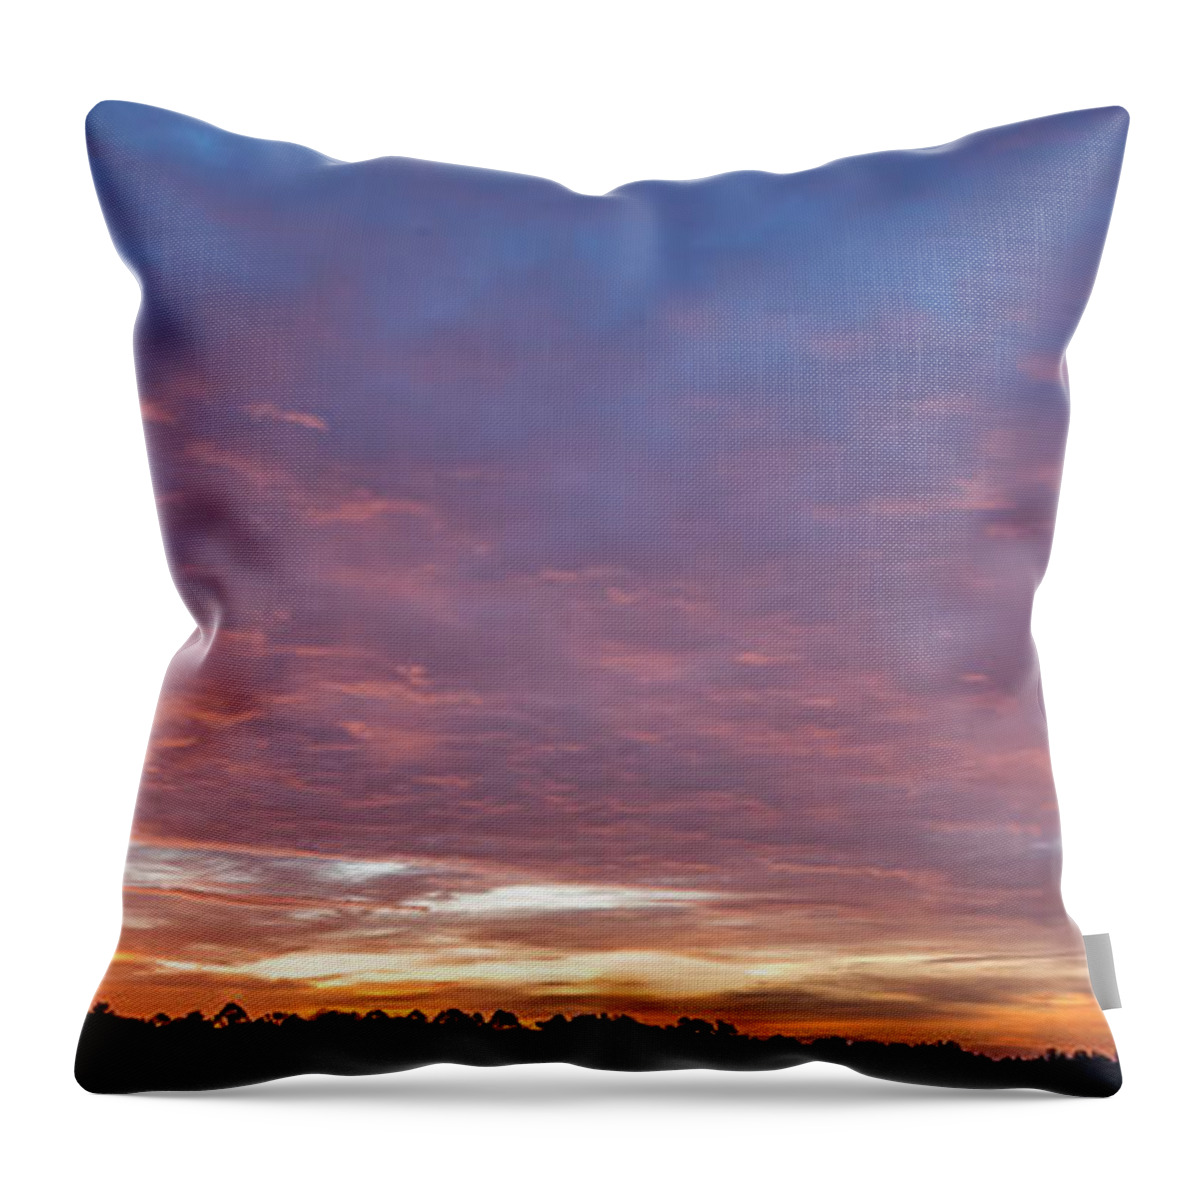 August Throw Pillow featuring the photograph August Morning Sky by Holden The Moment